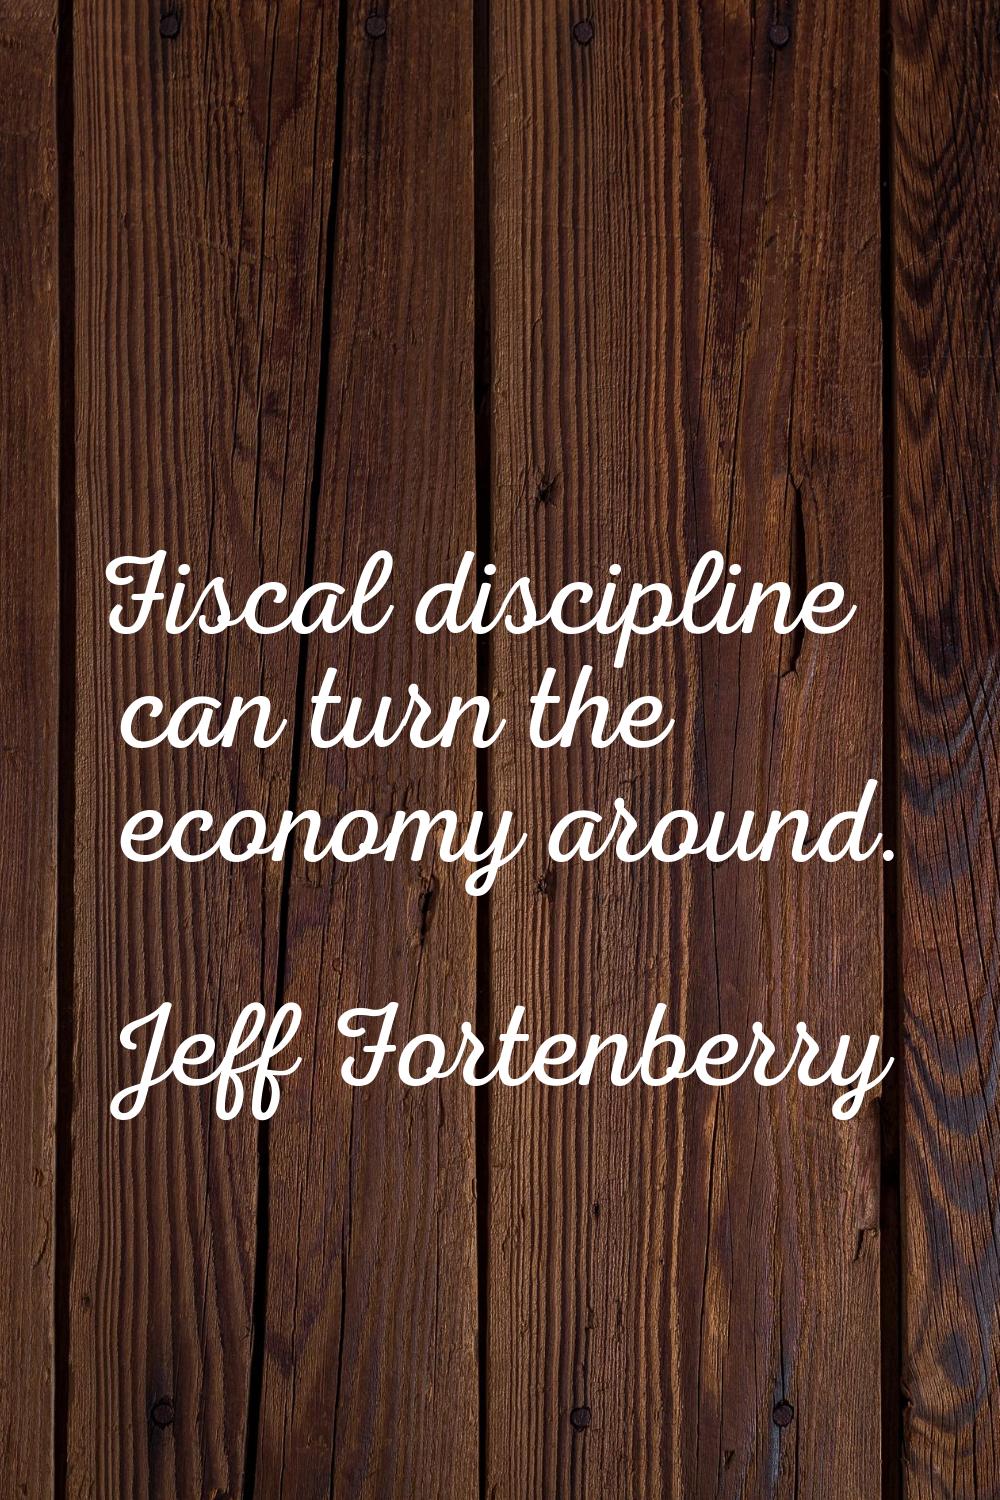 Fiscal discipline can turn the economy around.